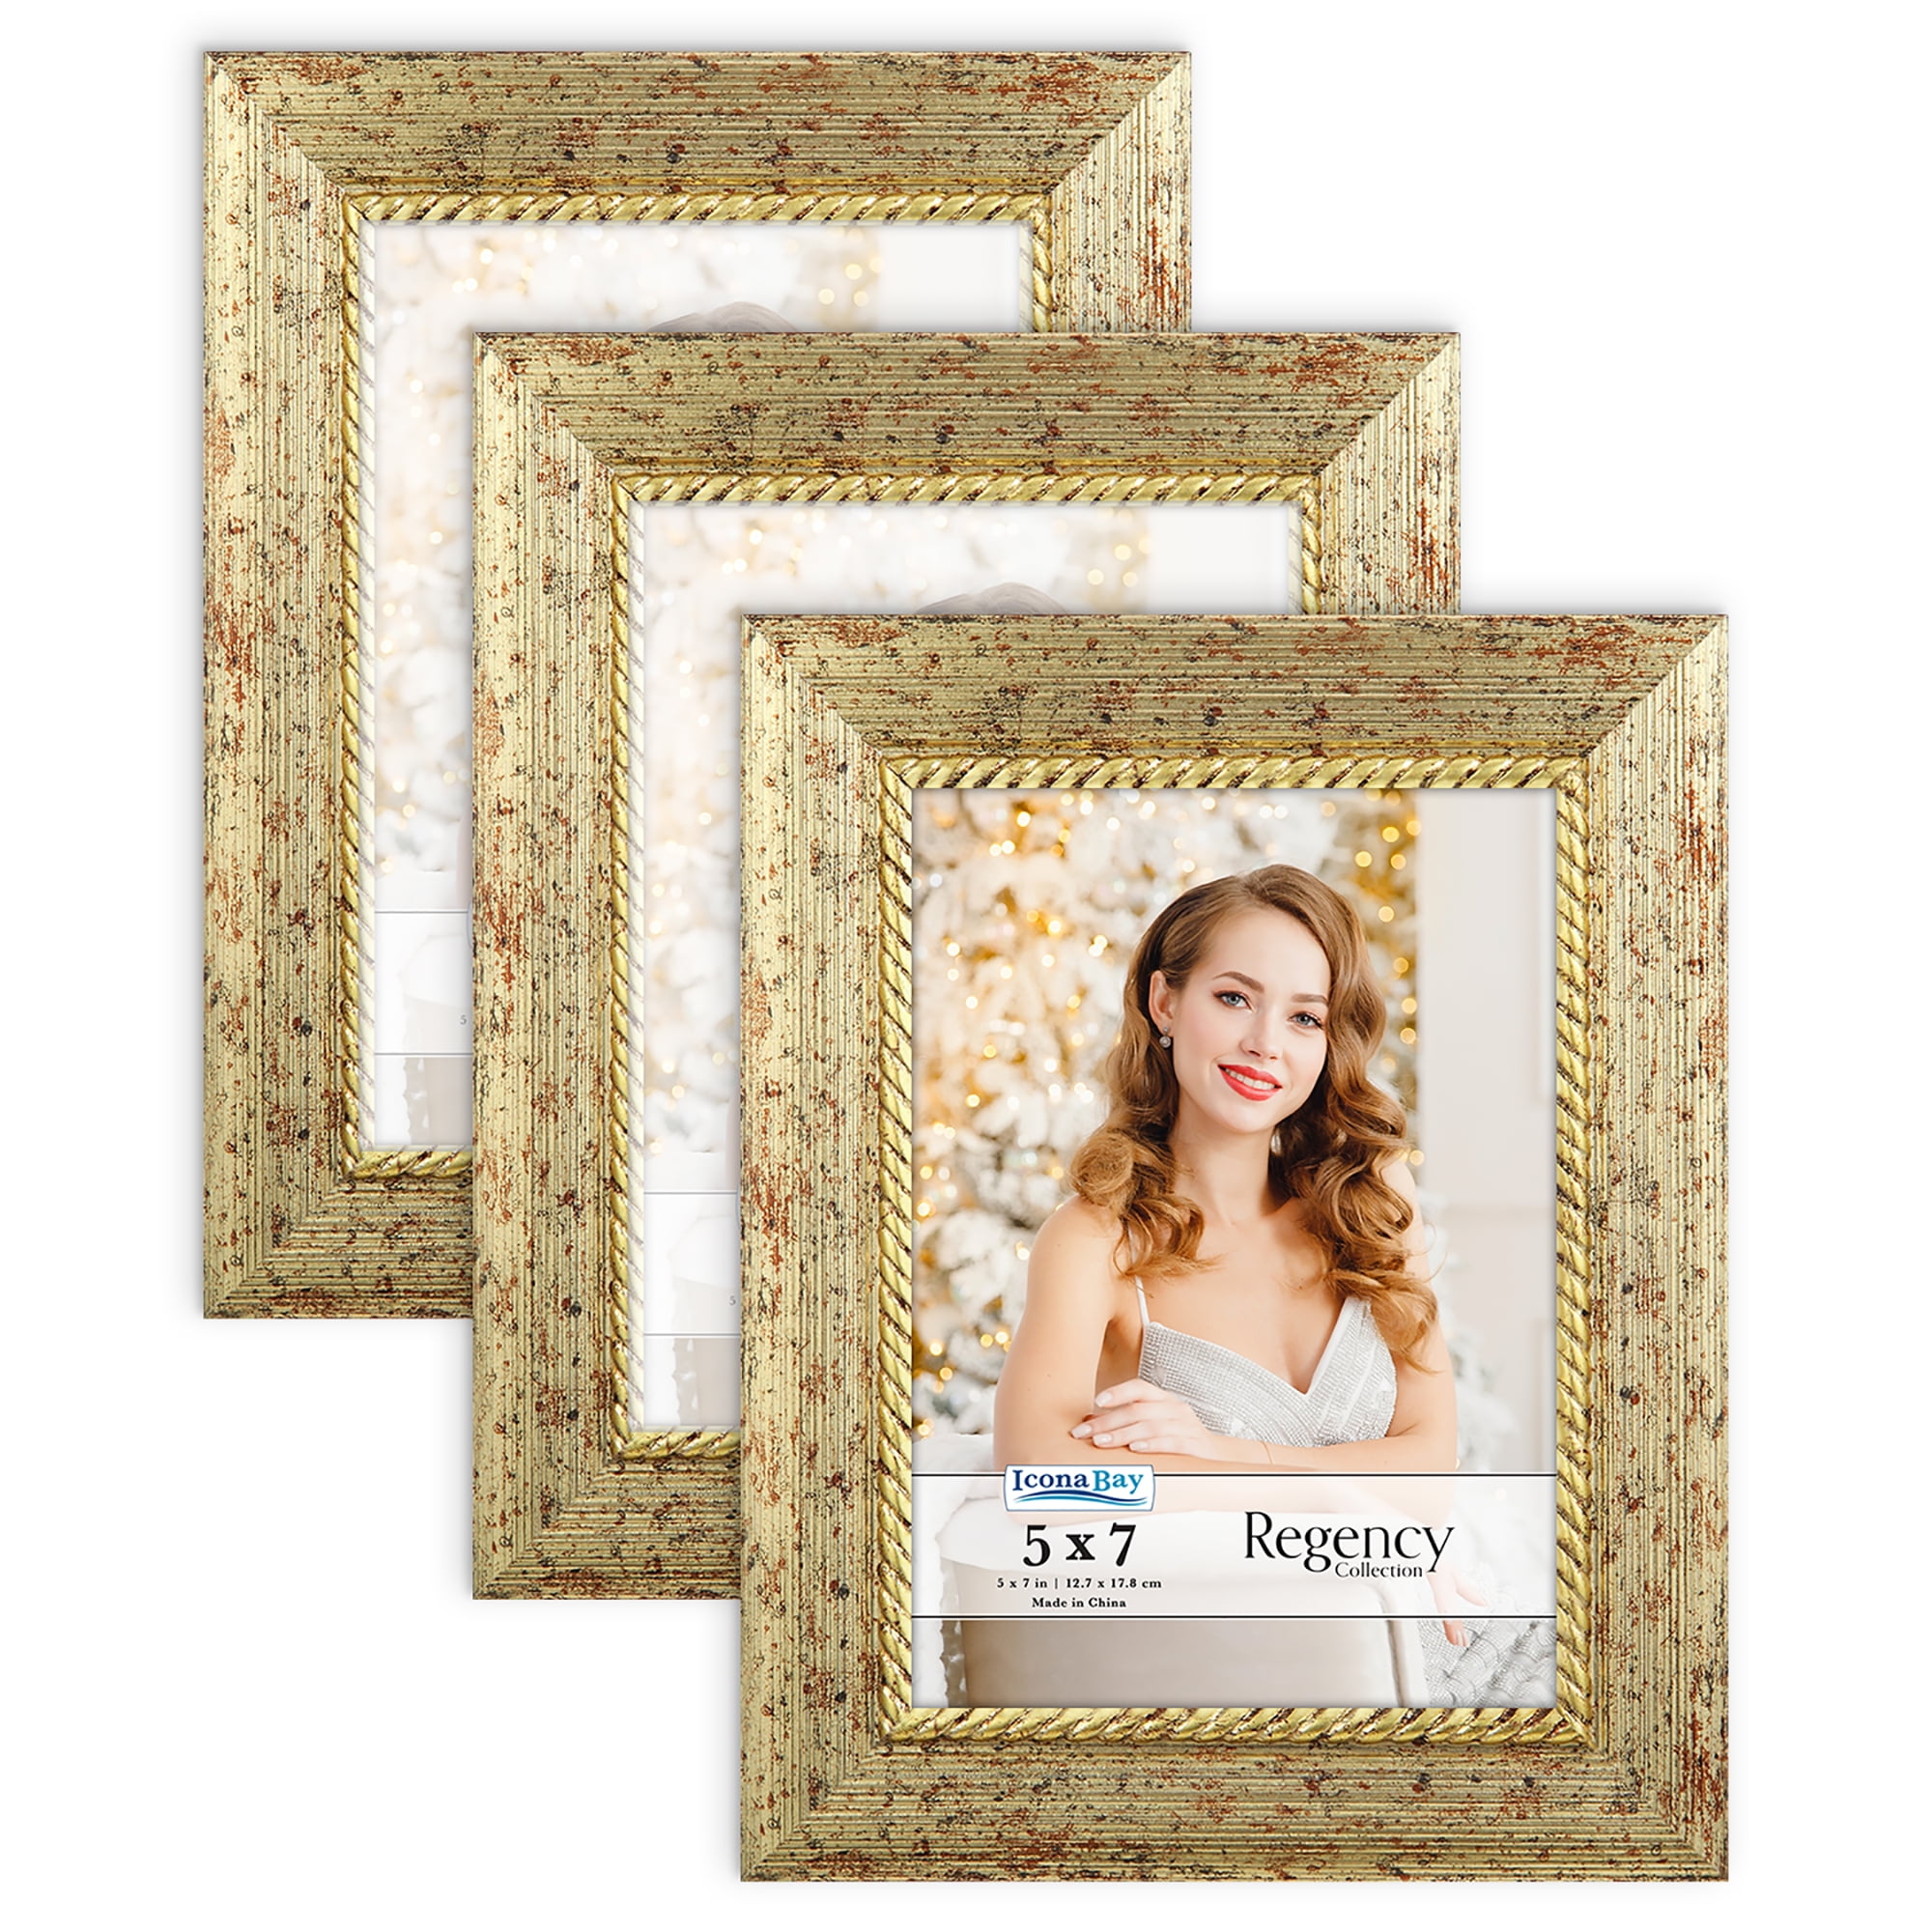 Details about   24 X 36 STANDARD PICTURE FRAME 2 3/4" WIDE GOLD LEAF SCOOP w/ GLAZING BACKING 